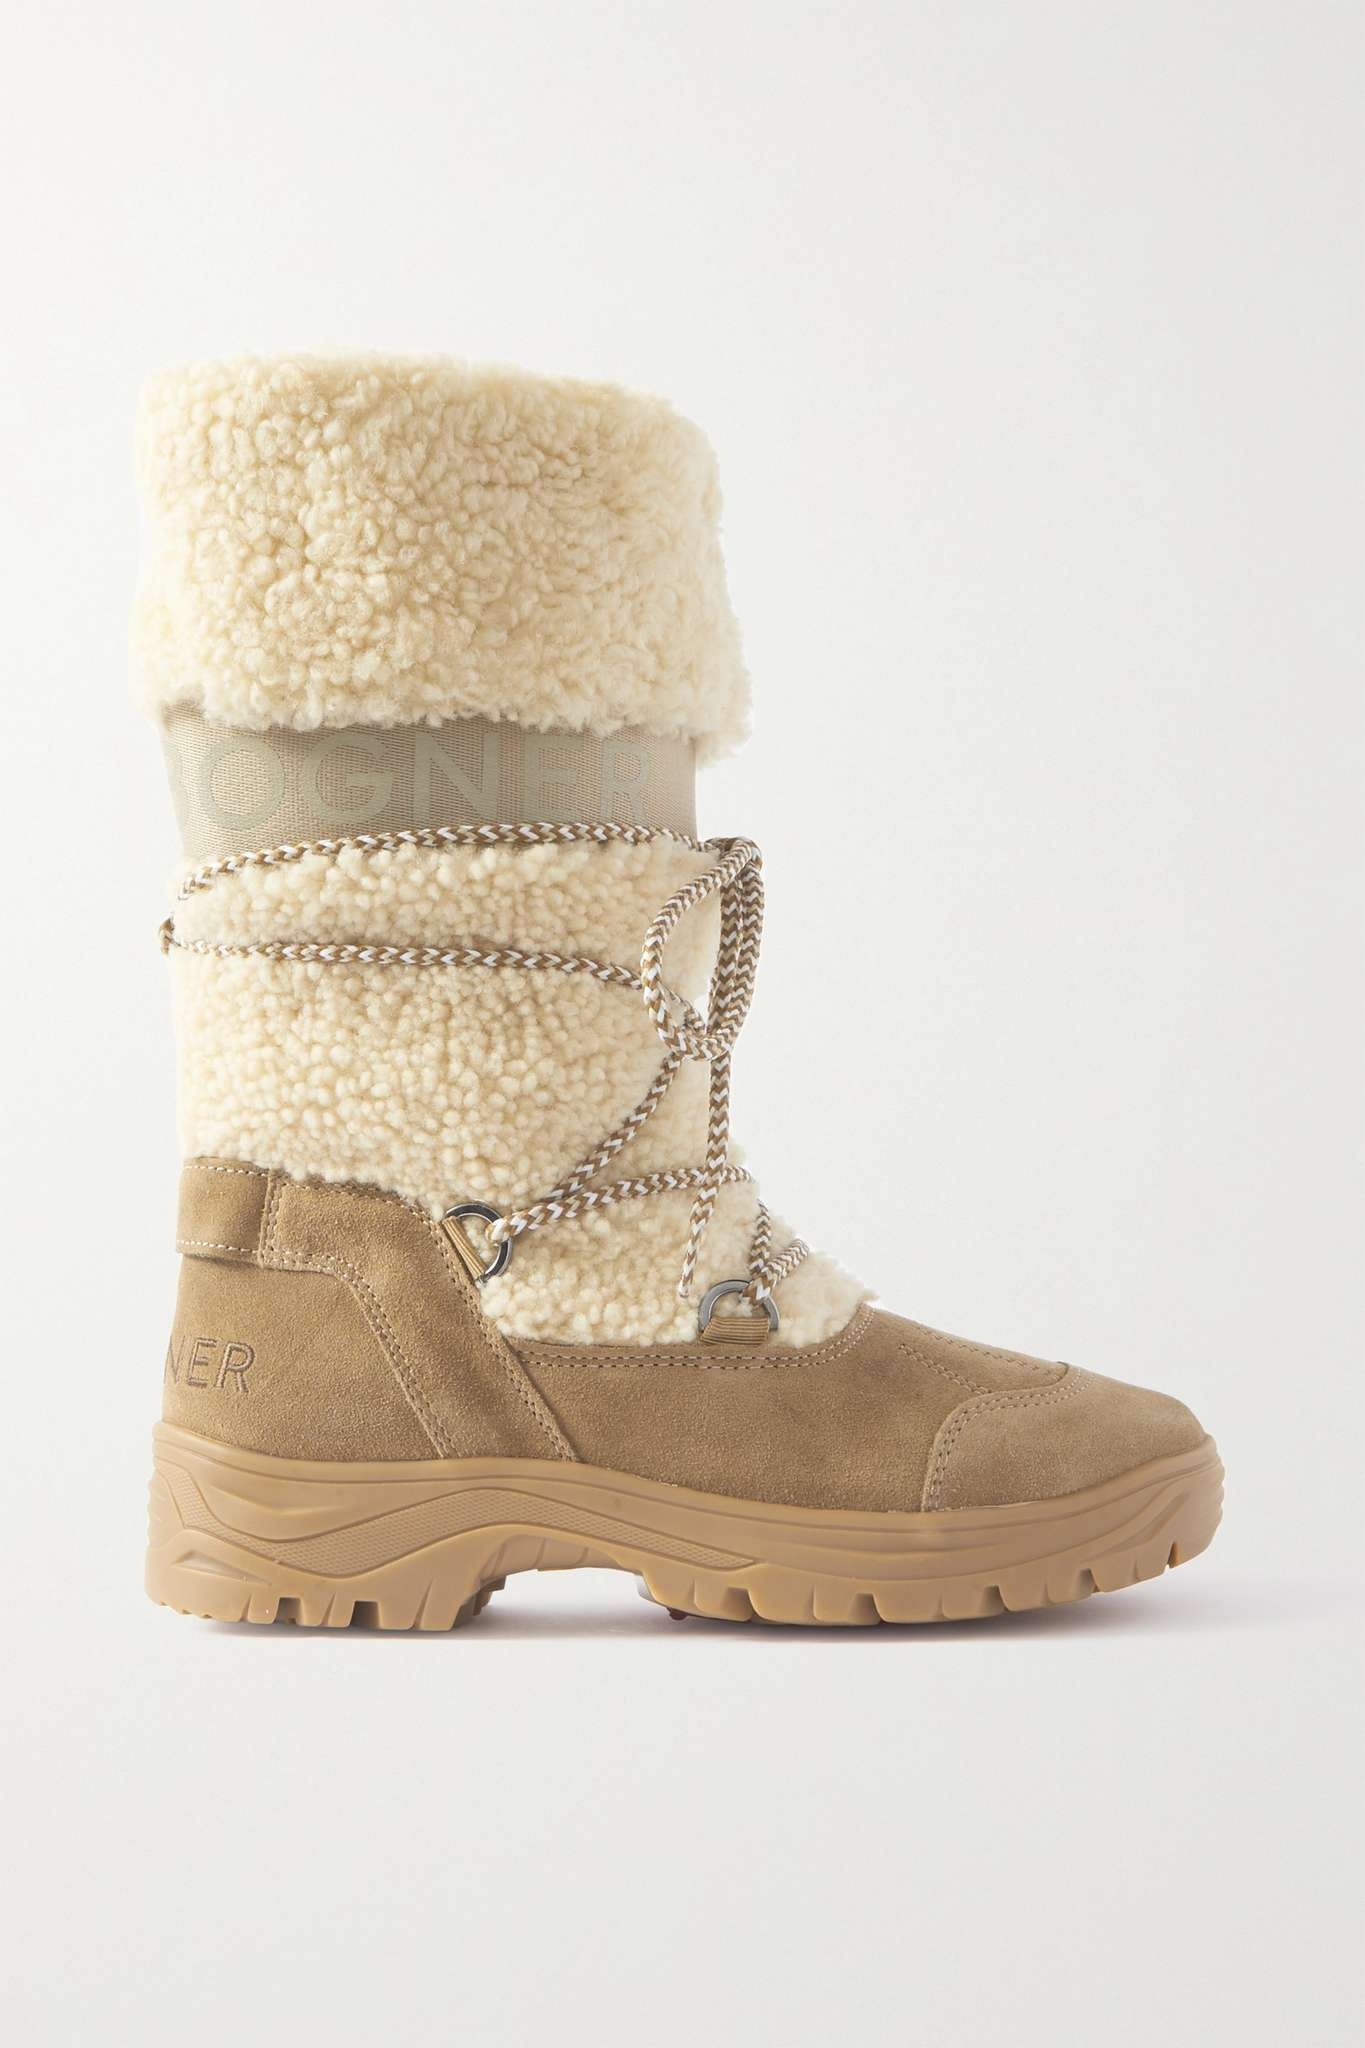 Alta Badia 2 B shearling and suede snow boots - 1